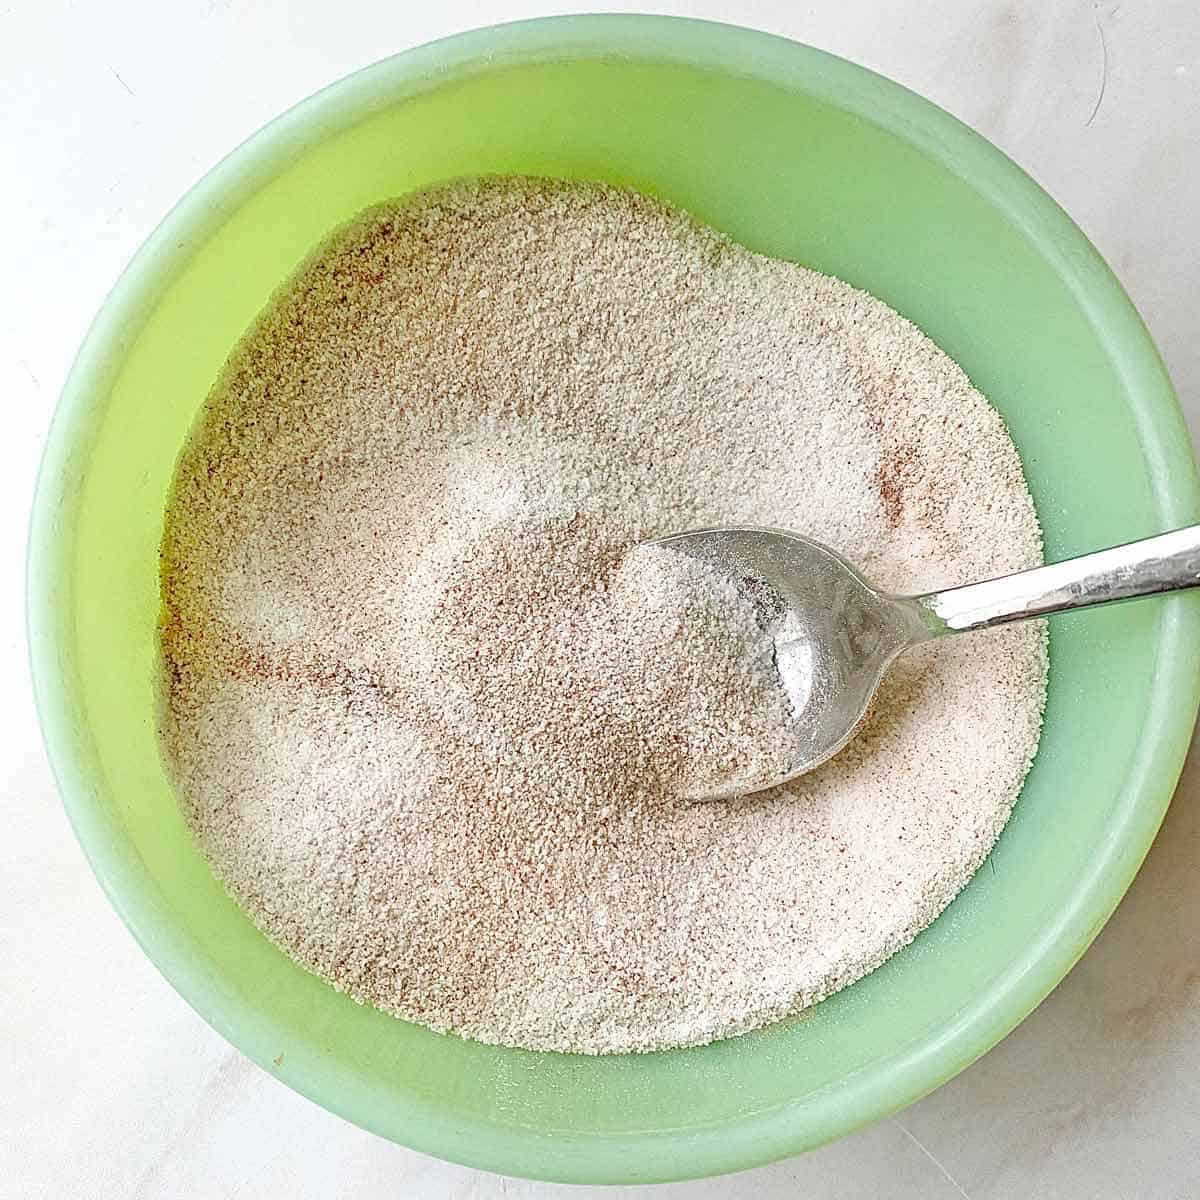 Stirring cinnamon and sugar together in a small green bowl with a spoon.